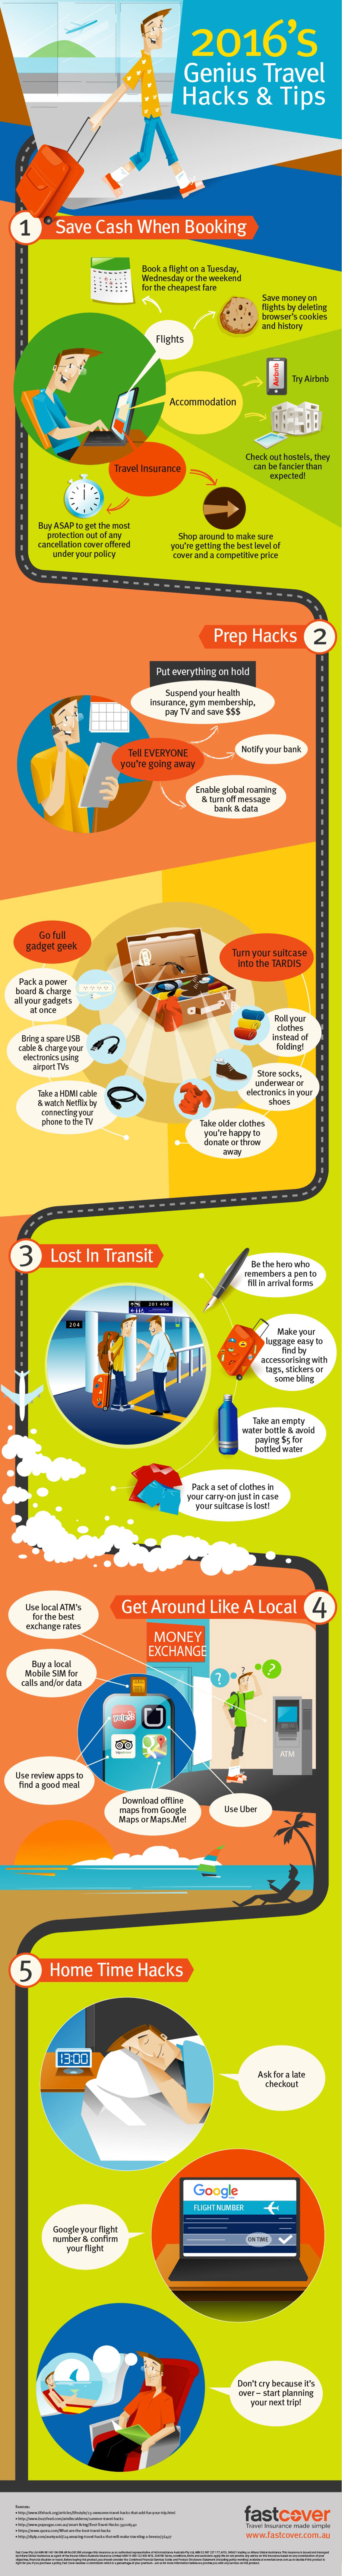 Genius Travel Hacks and Tips Infographic